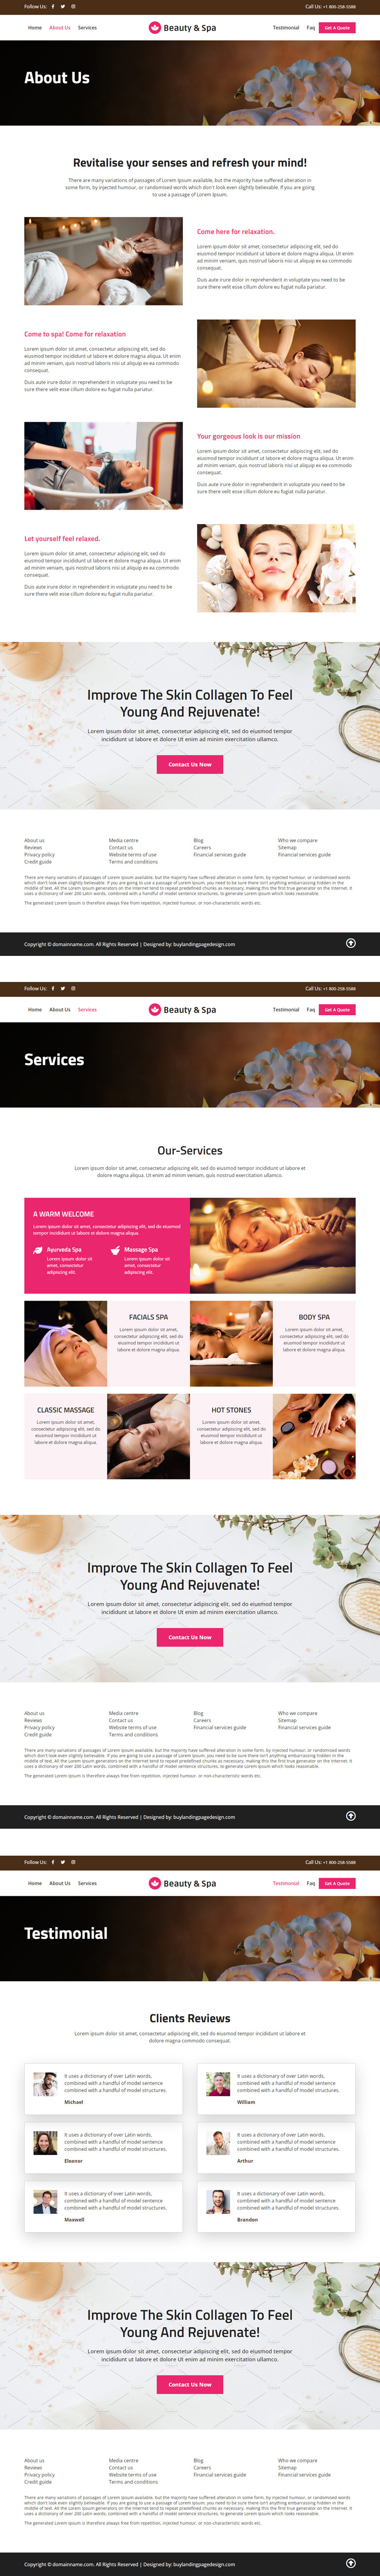 beauty and spa services responsive website design